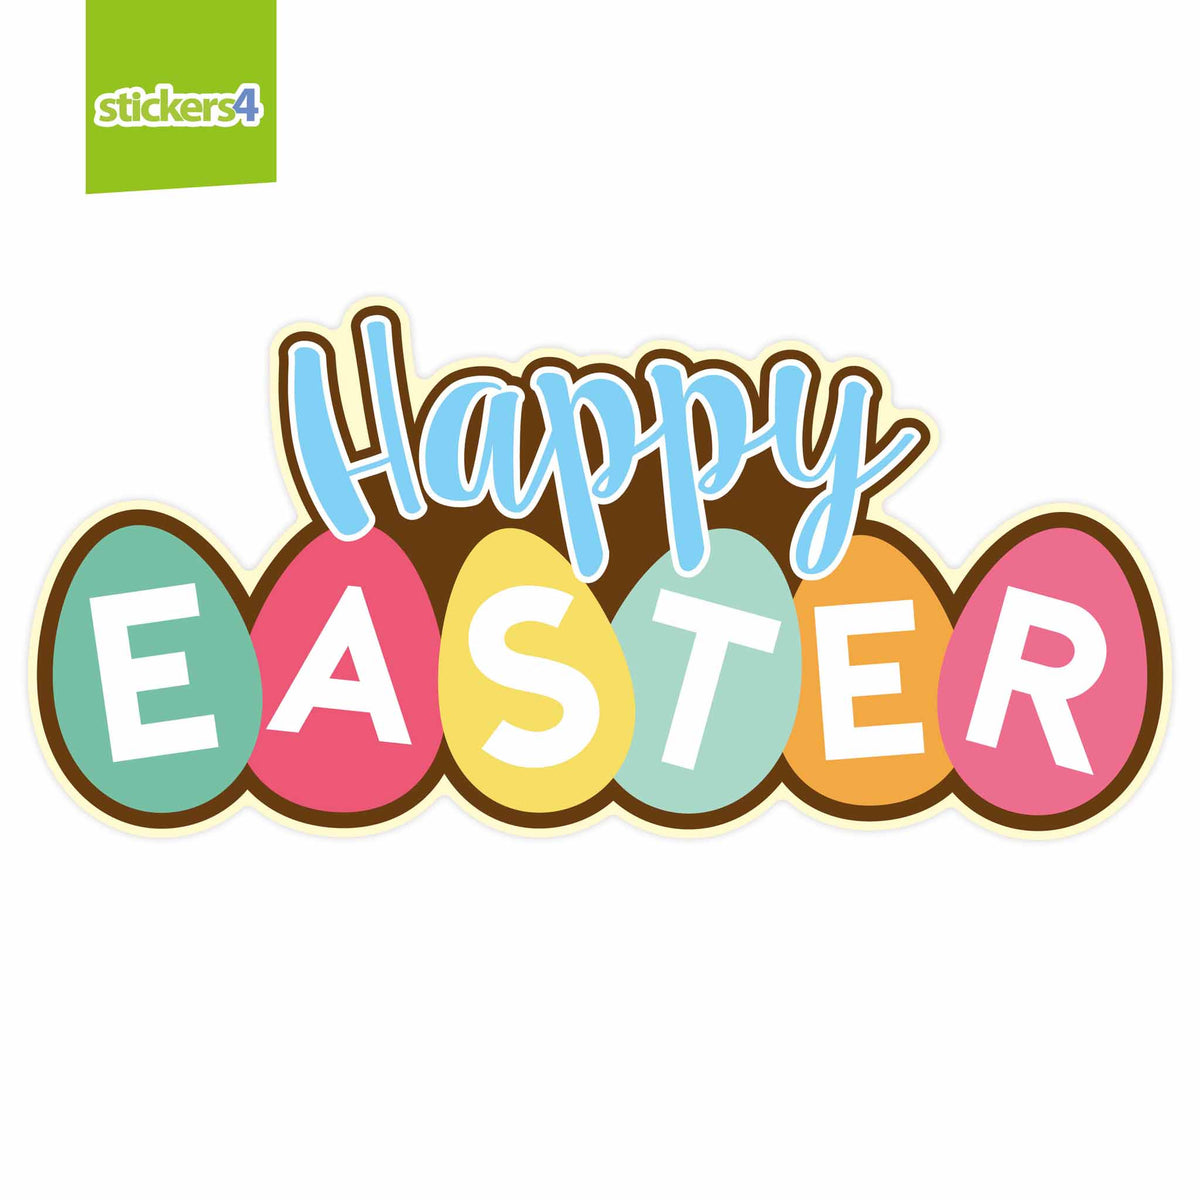 Happy Easter Choccy Eggs Window Cling